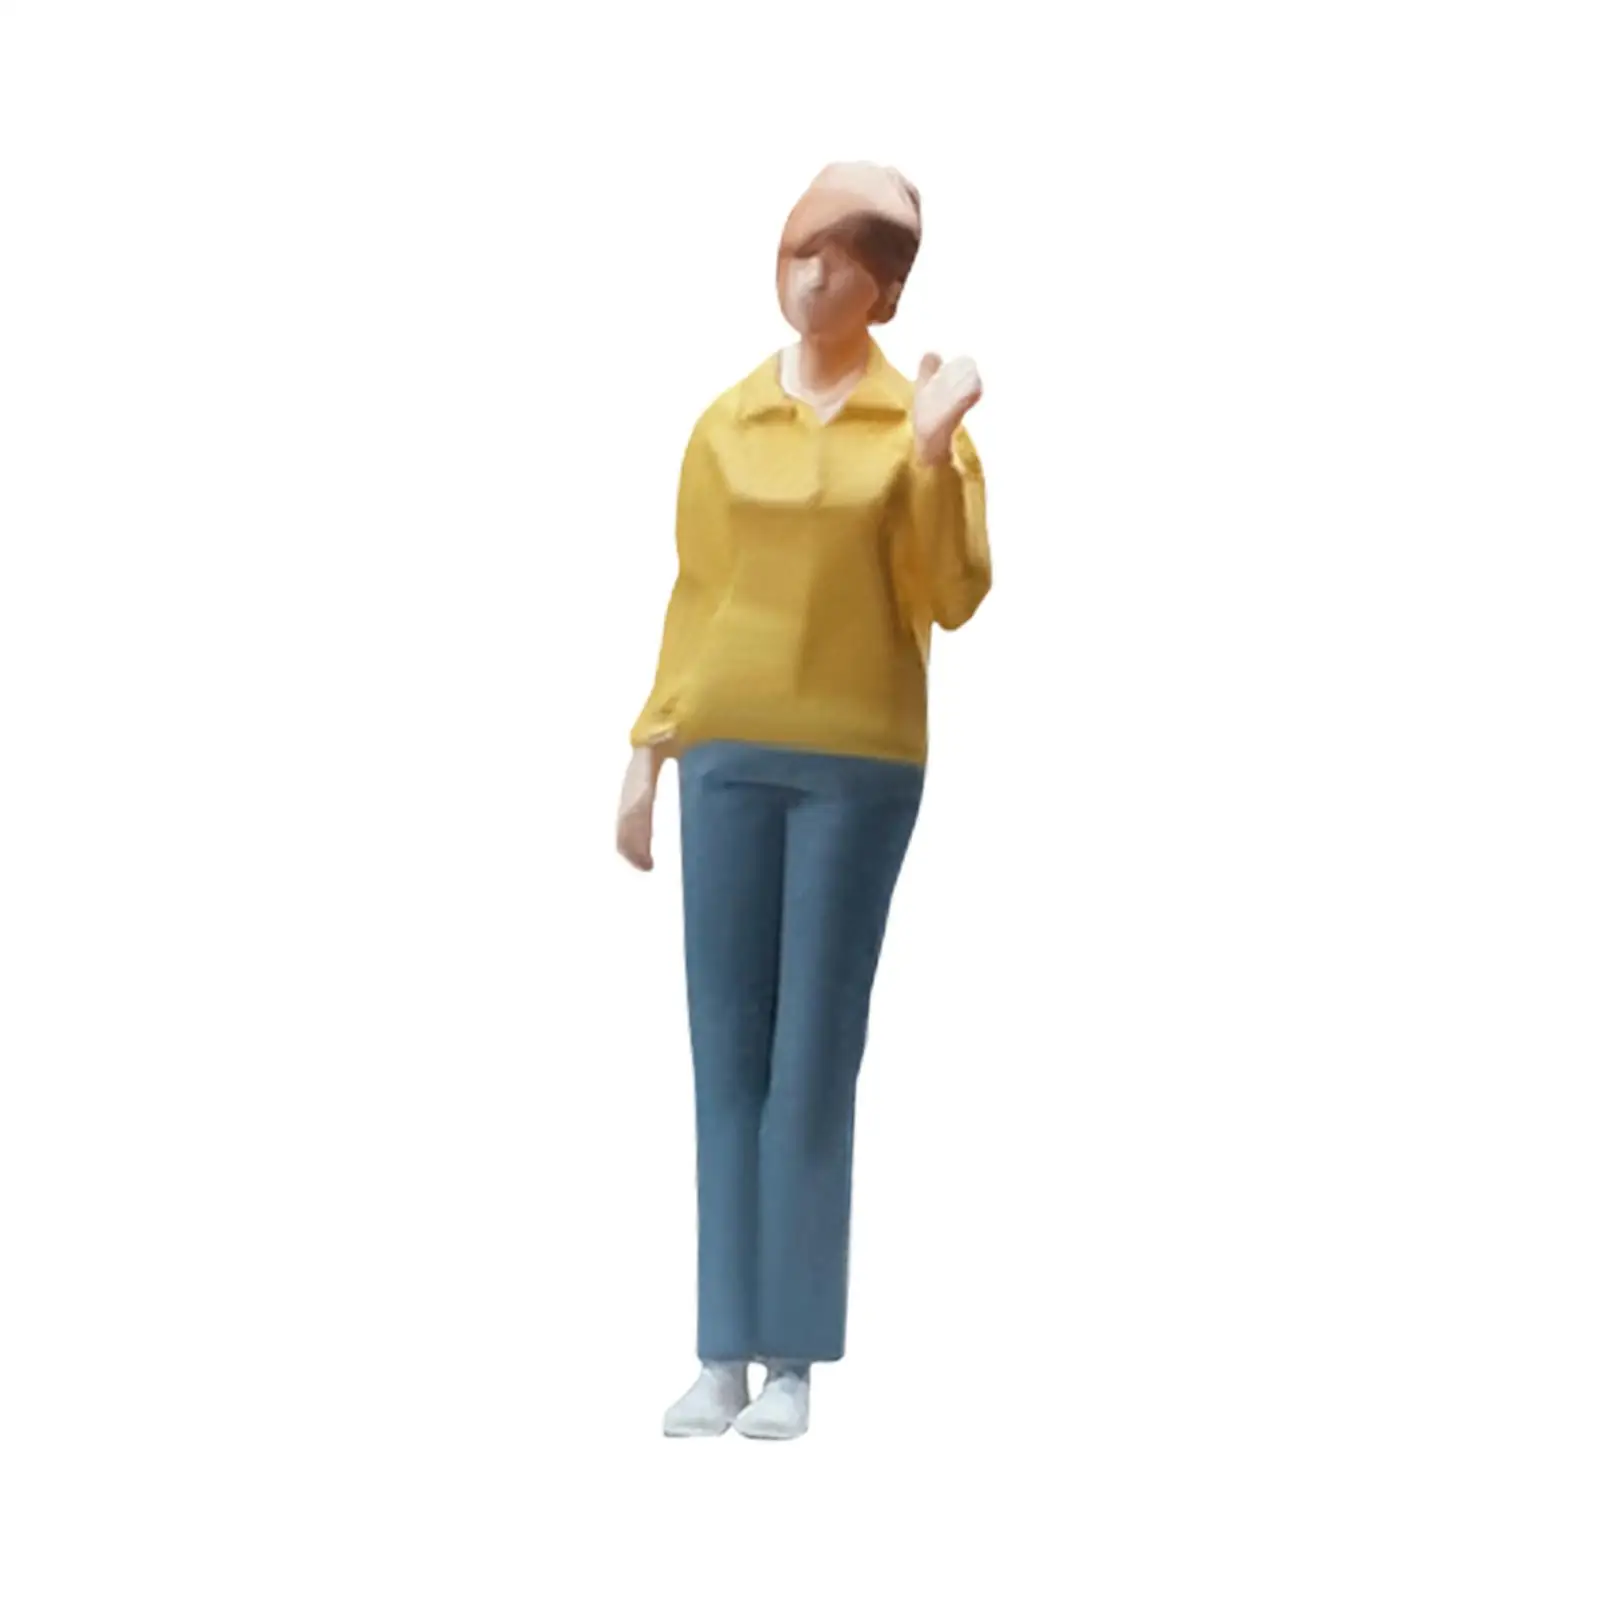 Simulated Girl Figures 1/64 HO Scale Realistic Character Model Painted Figures for Model Train Layout Miniature Scene Diorama